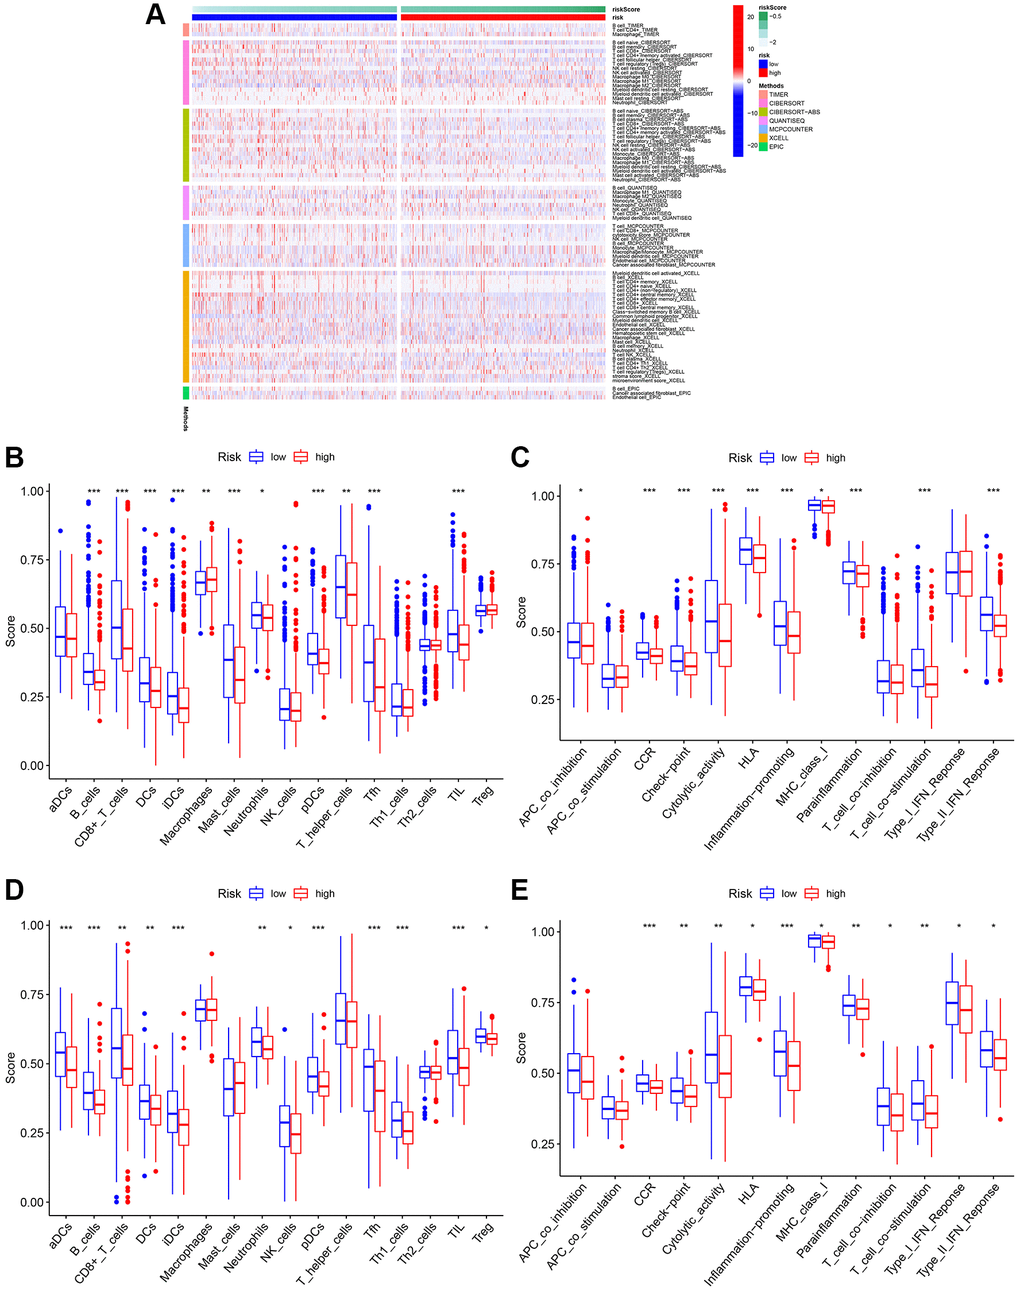 Analysis of immune cell infiltration. (A) Heatmap of immune cell infiltration. (B) Boxplot of immune cell infiltration in TCGA cohort. (C) Boxplot of immune function in TCGA cohort. (D) Boxplot of immune cell infiltration in GSE20685. (E) Boxplot of immune function in GSE20685.